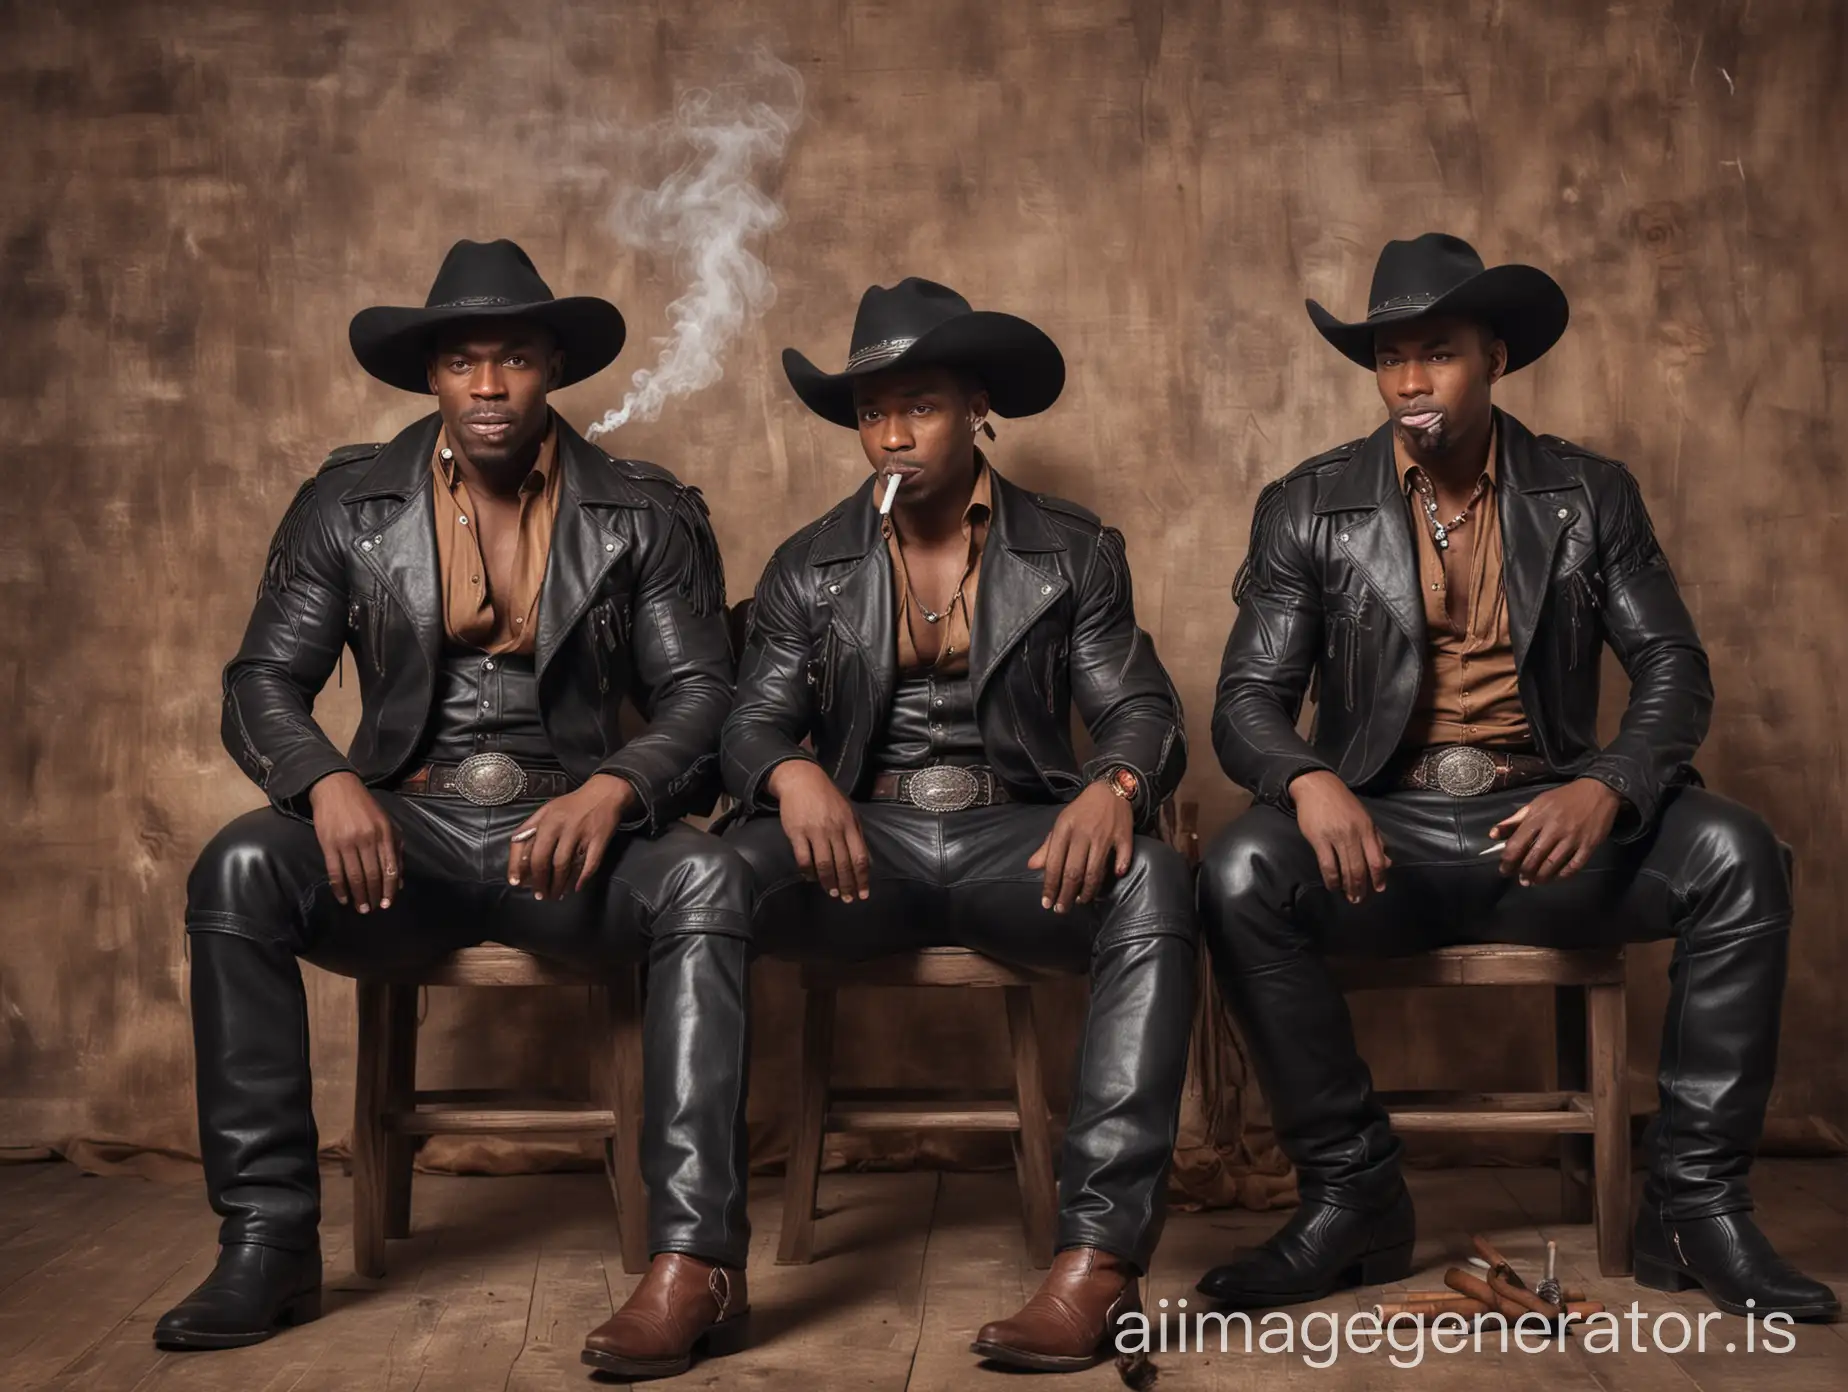 Muscular-Black-Cowboys-Smoking-Cigars-in-Leather-Outfits